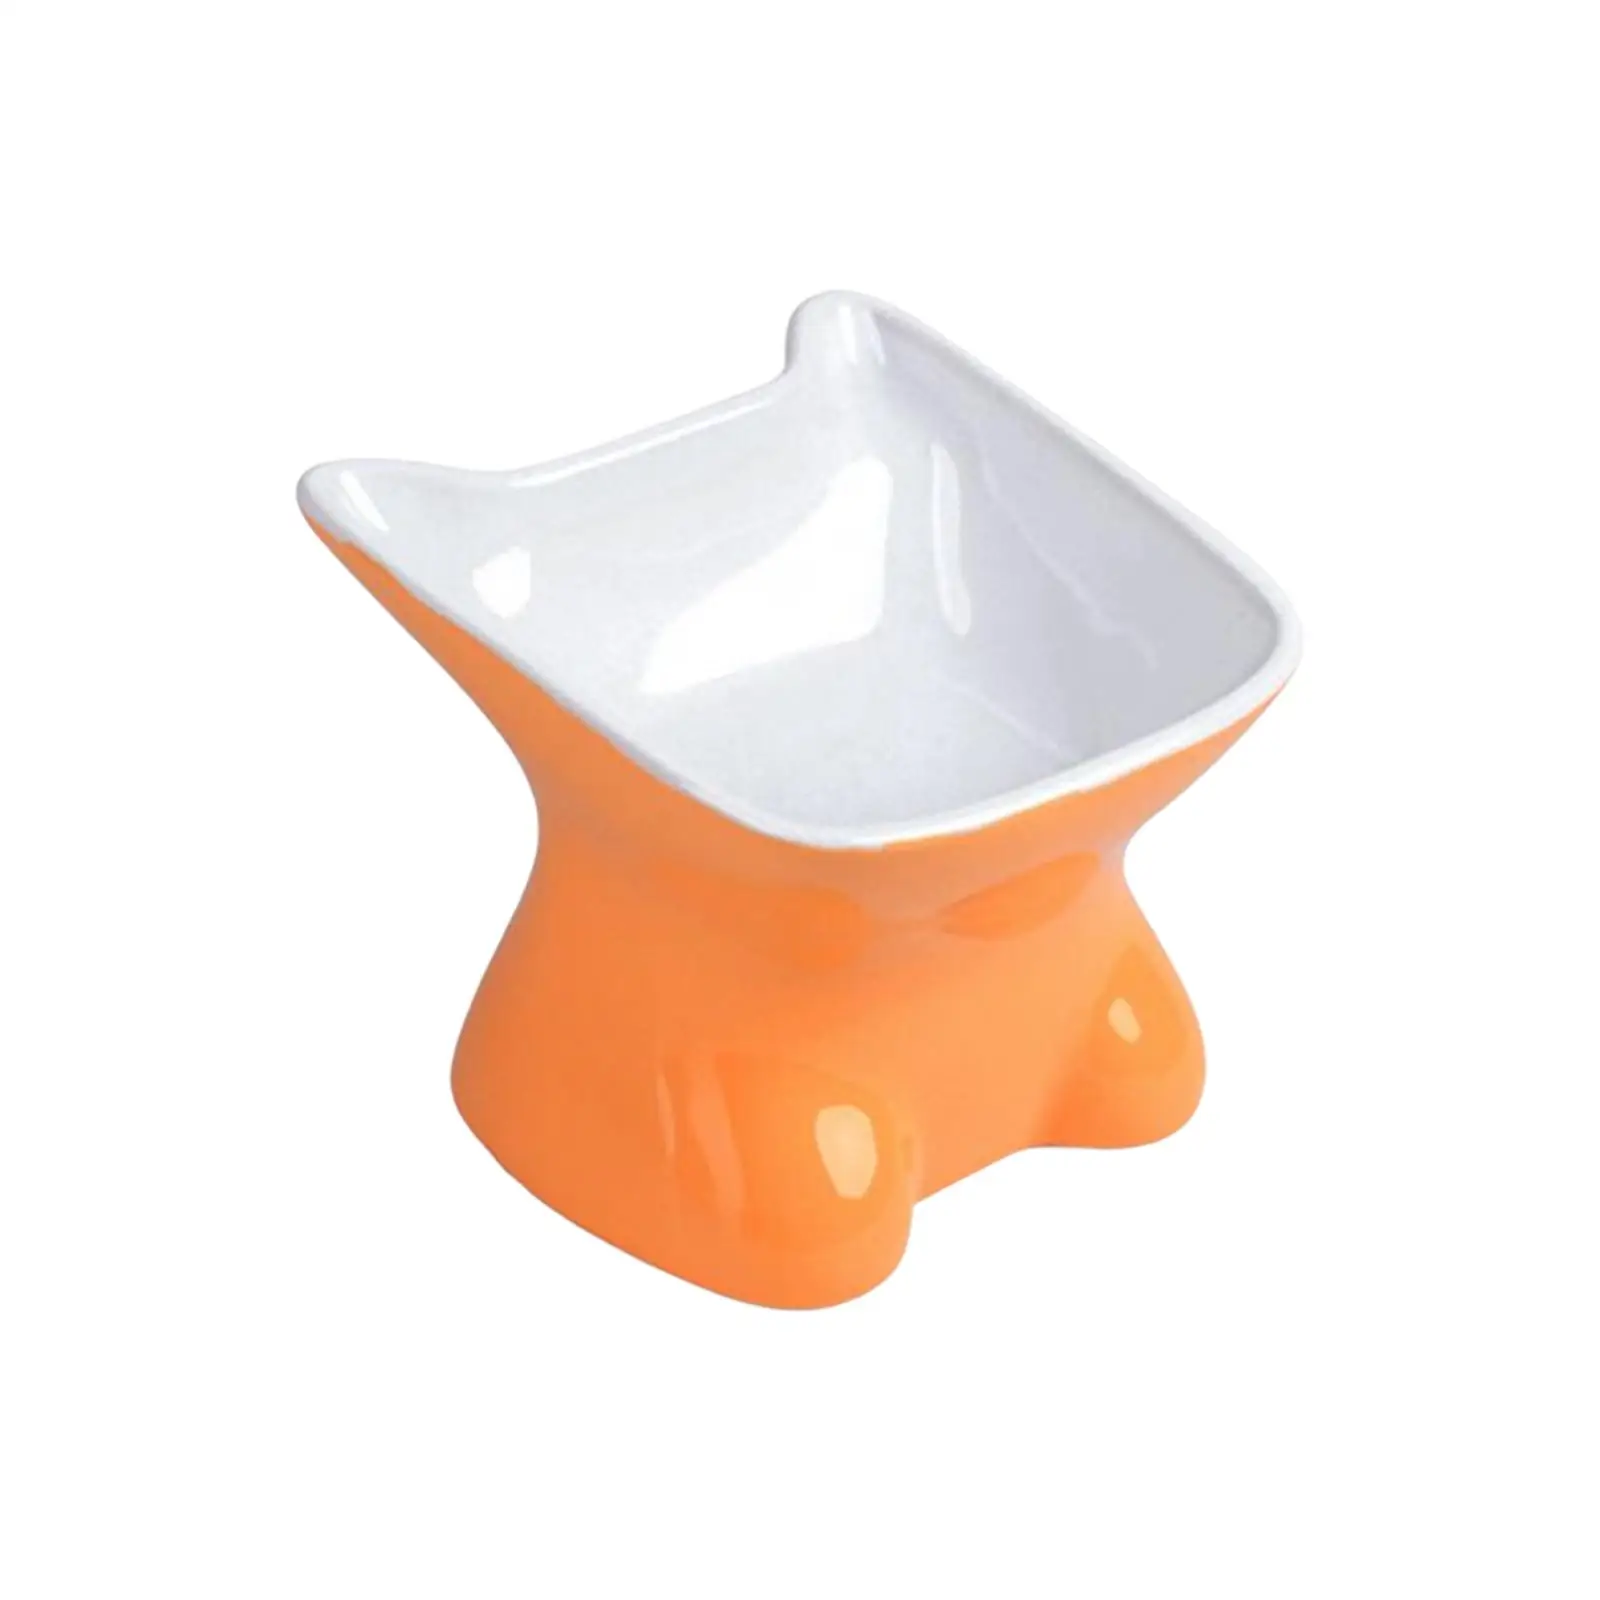 Raised Cat Food Bowl Pet Feeding Bowl Durable Protection Cervical Ceramic Raised Tilted Feeder Kitty Snack Bowl for Small Dogs